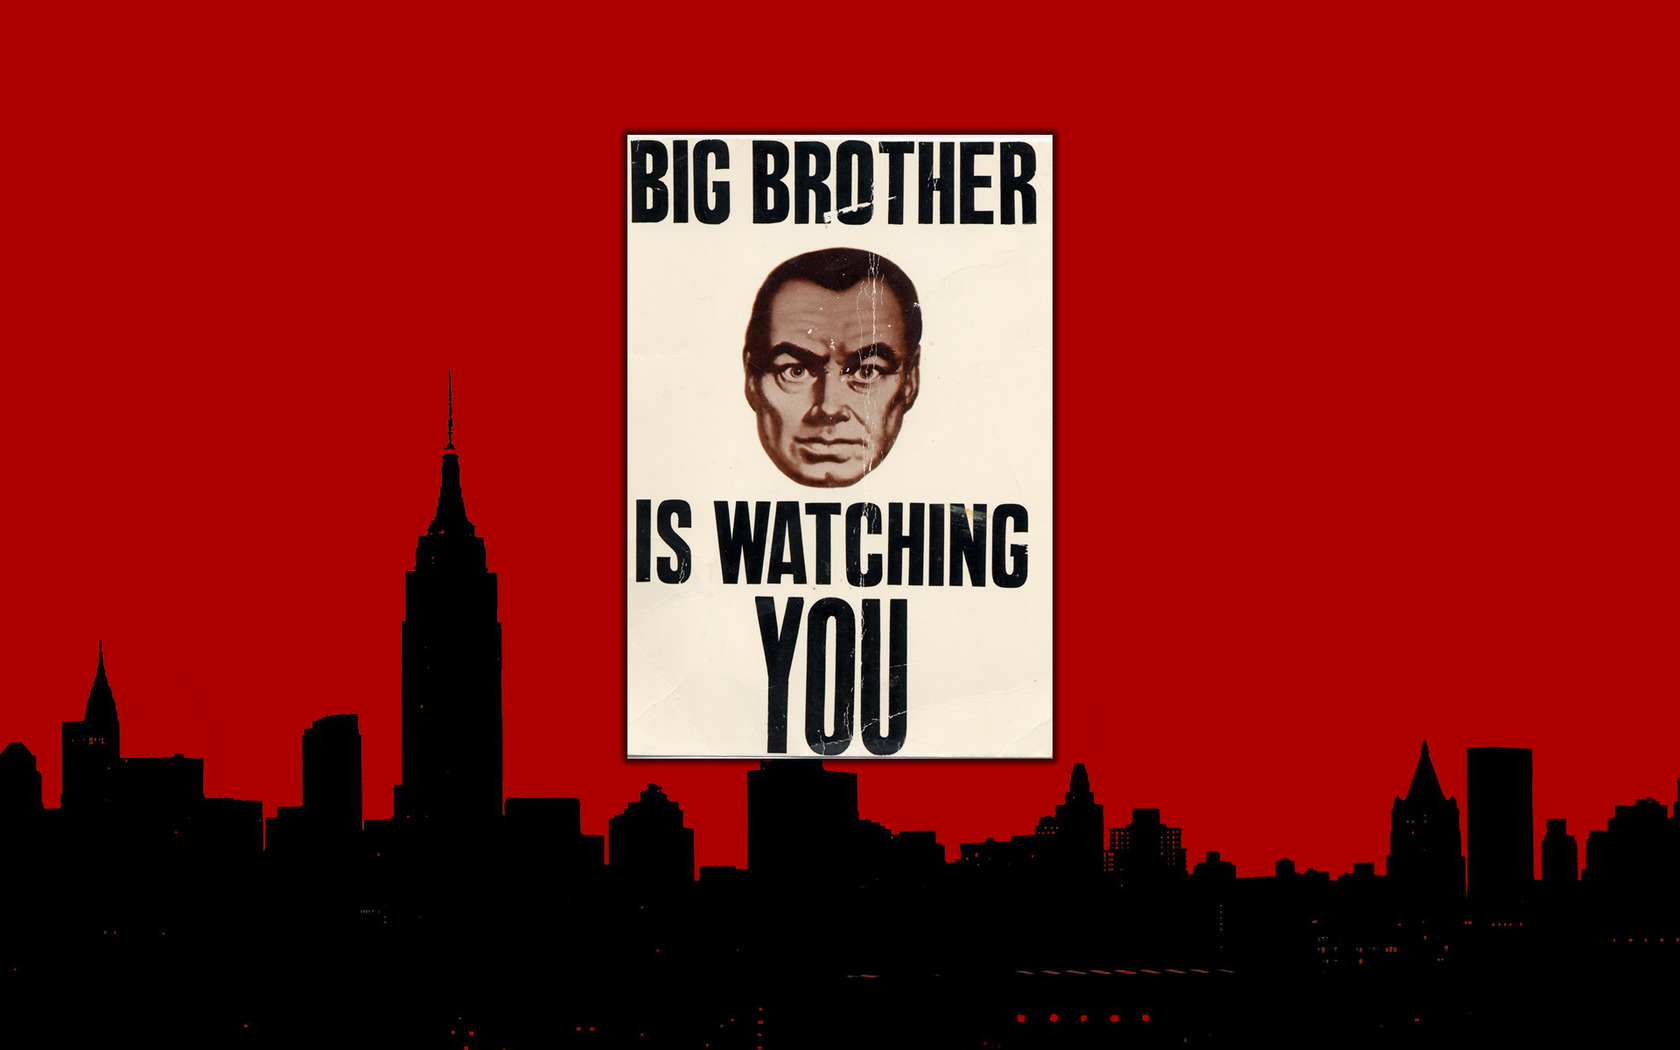 Big Brother Is Watching You. The worlds biggest fridge magnet